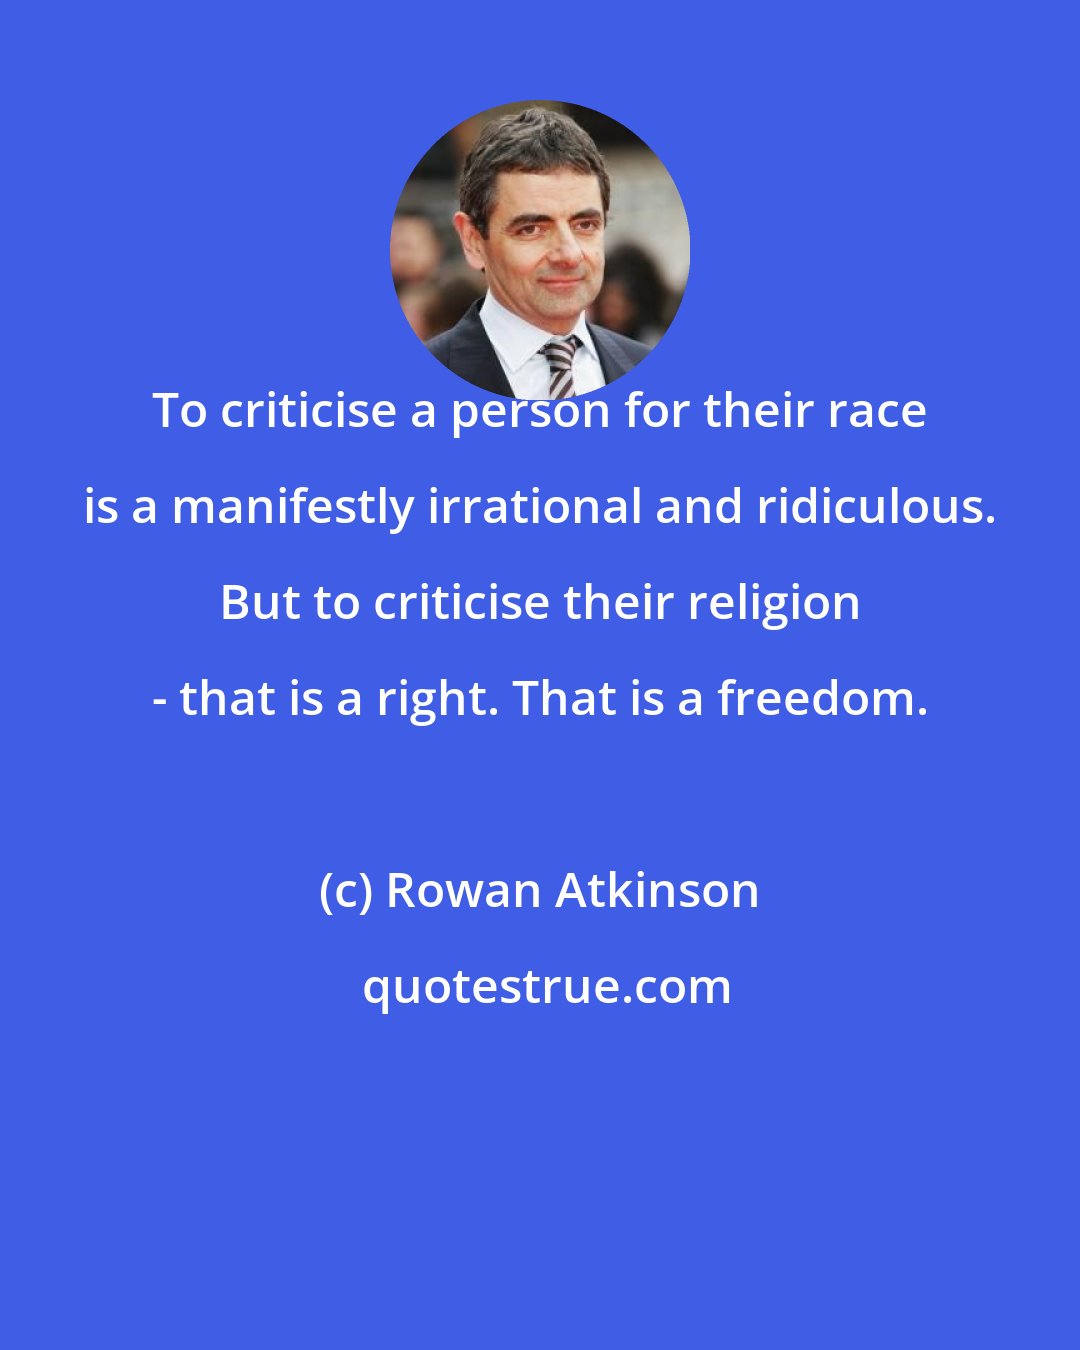 Rowan Atkinson: To criticise a person for their race is a manifestly irrational and ridiculous. But to criticise their religion - that is a right. That is a freedom.